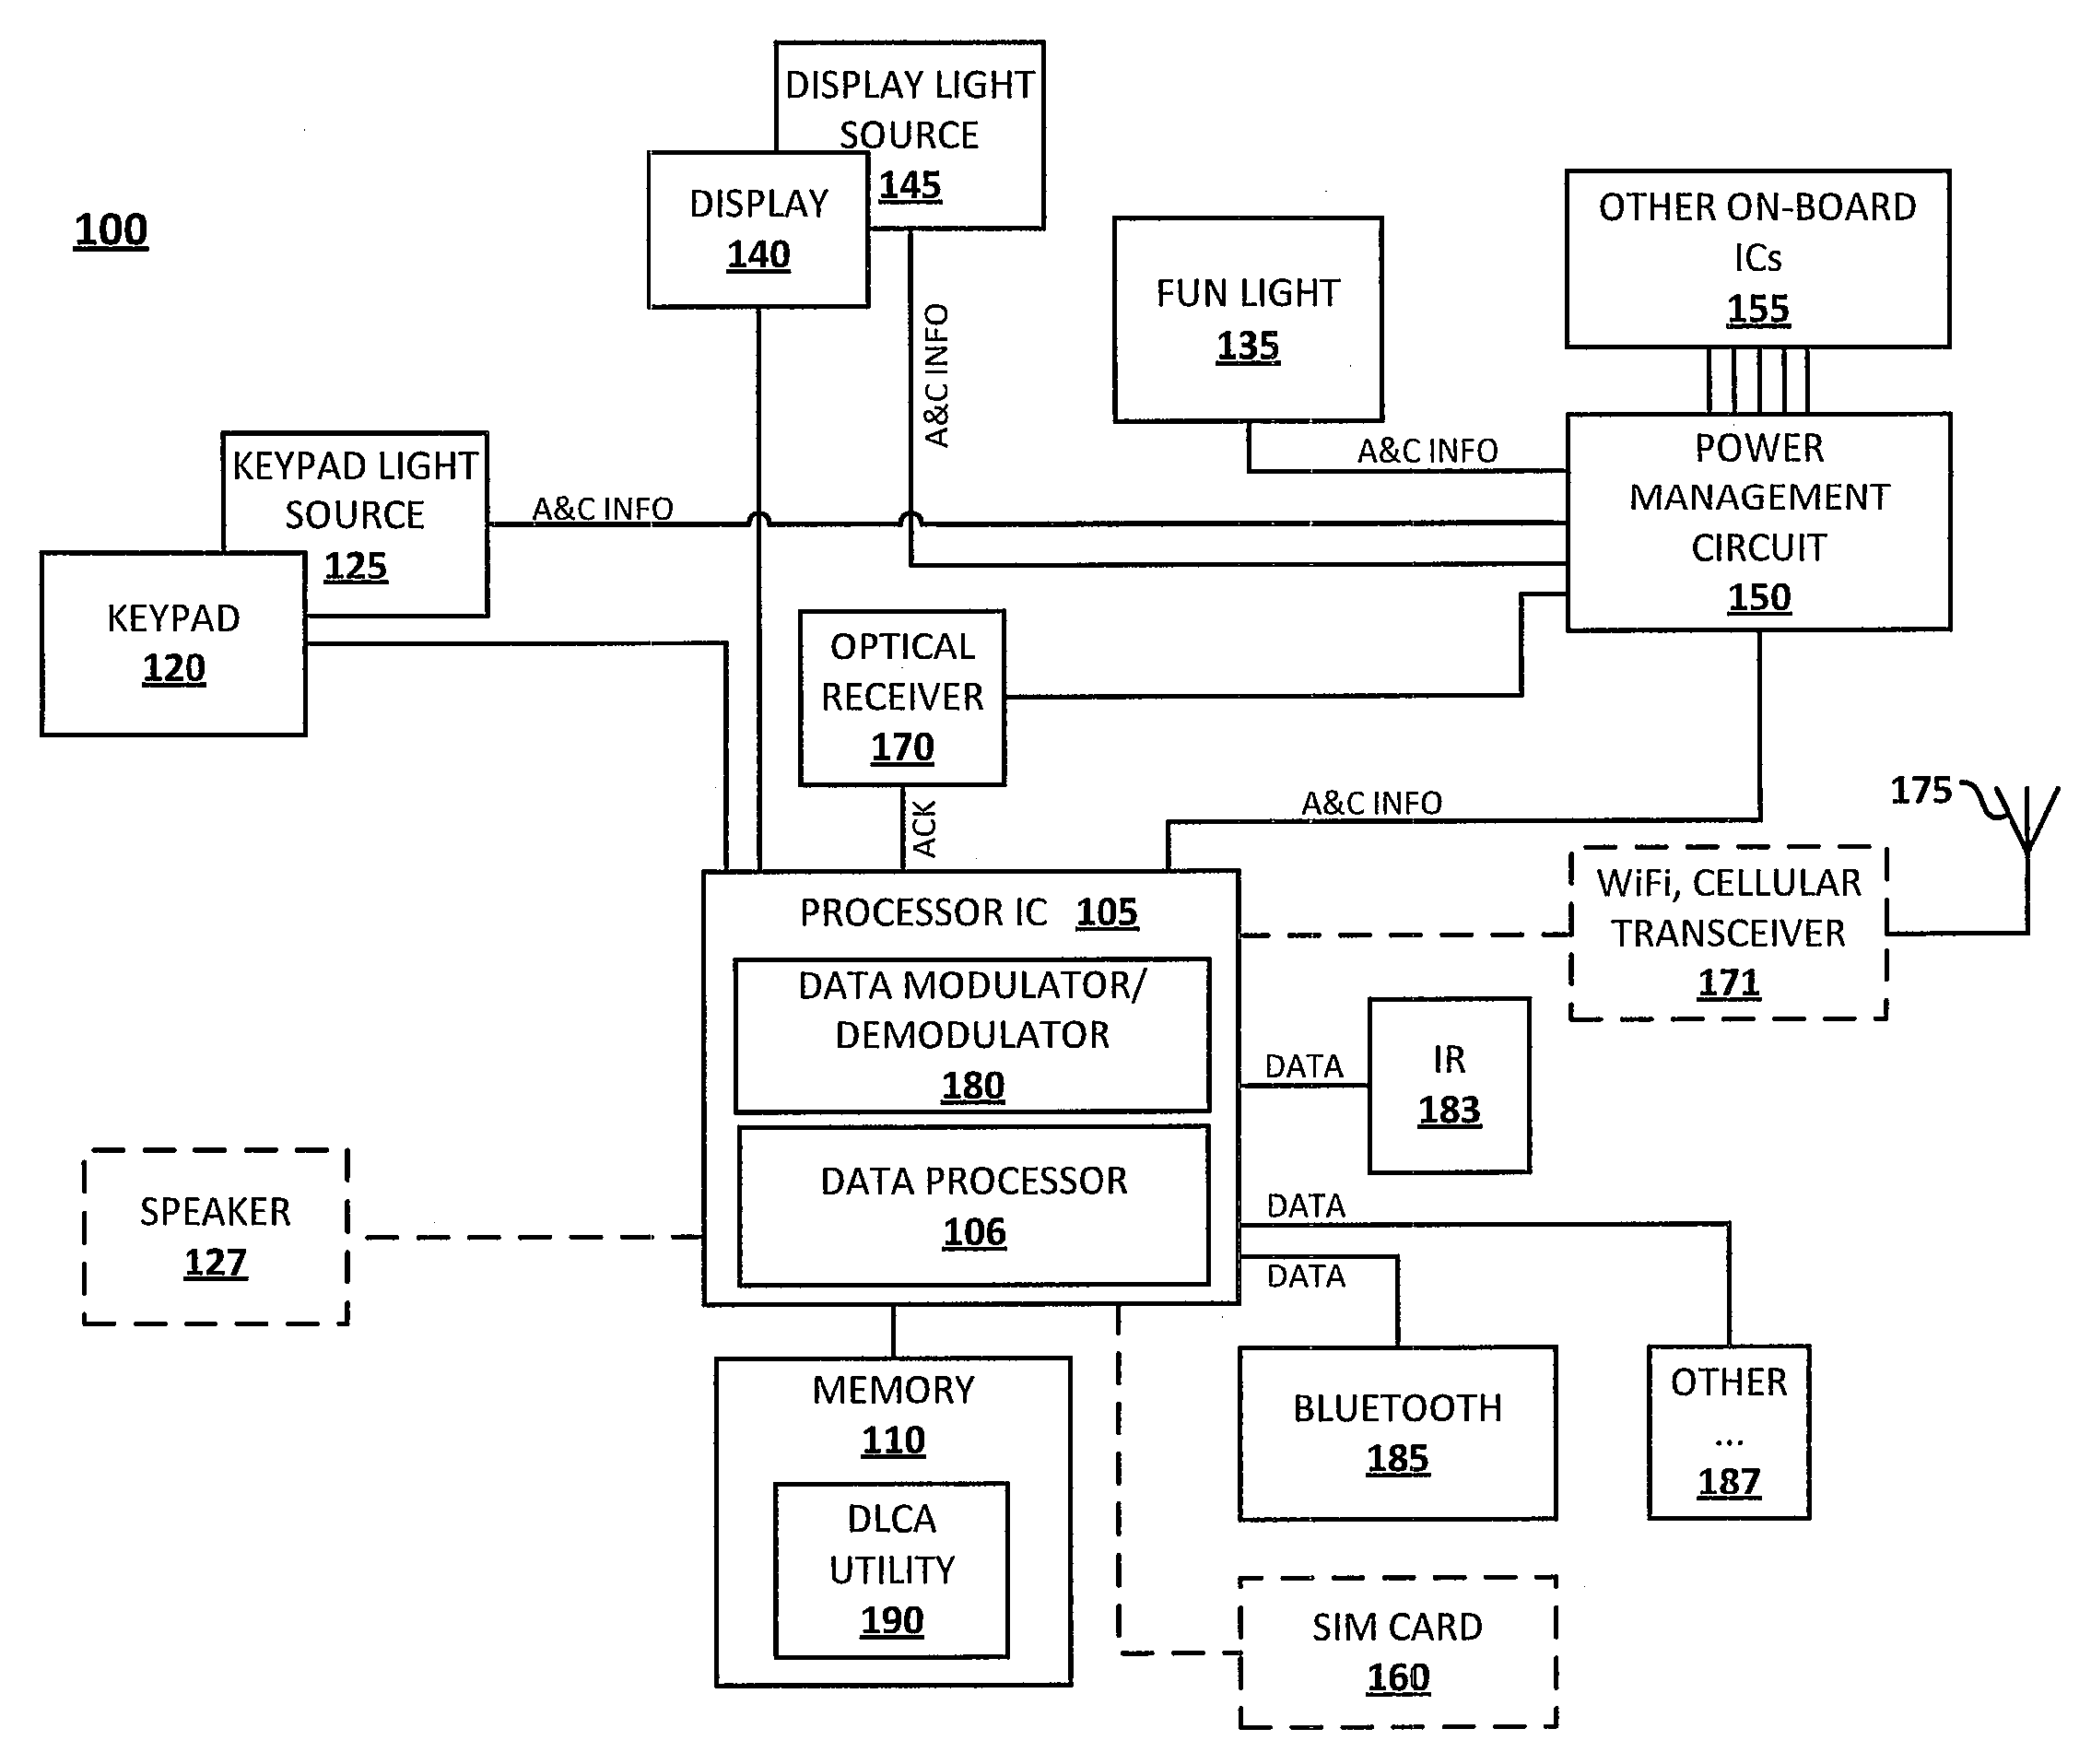 System and Method for Pre-Configuring and Authenticating Data Communication Links